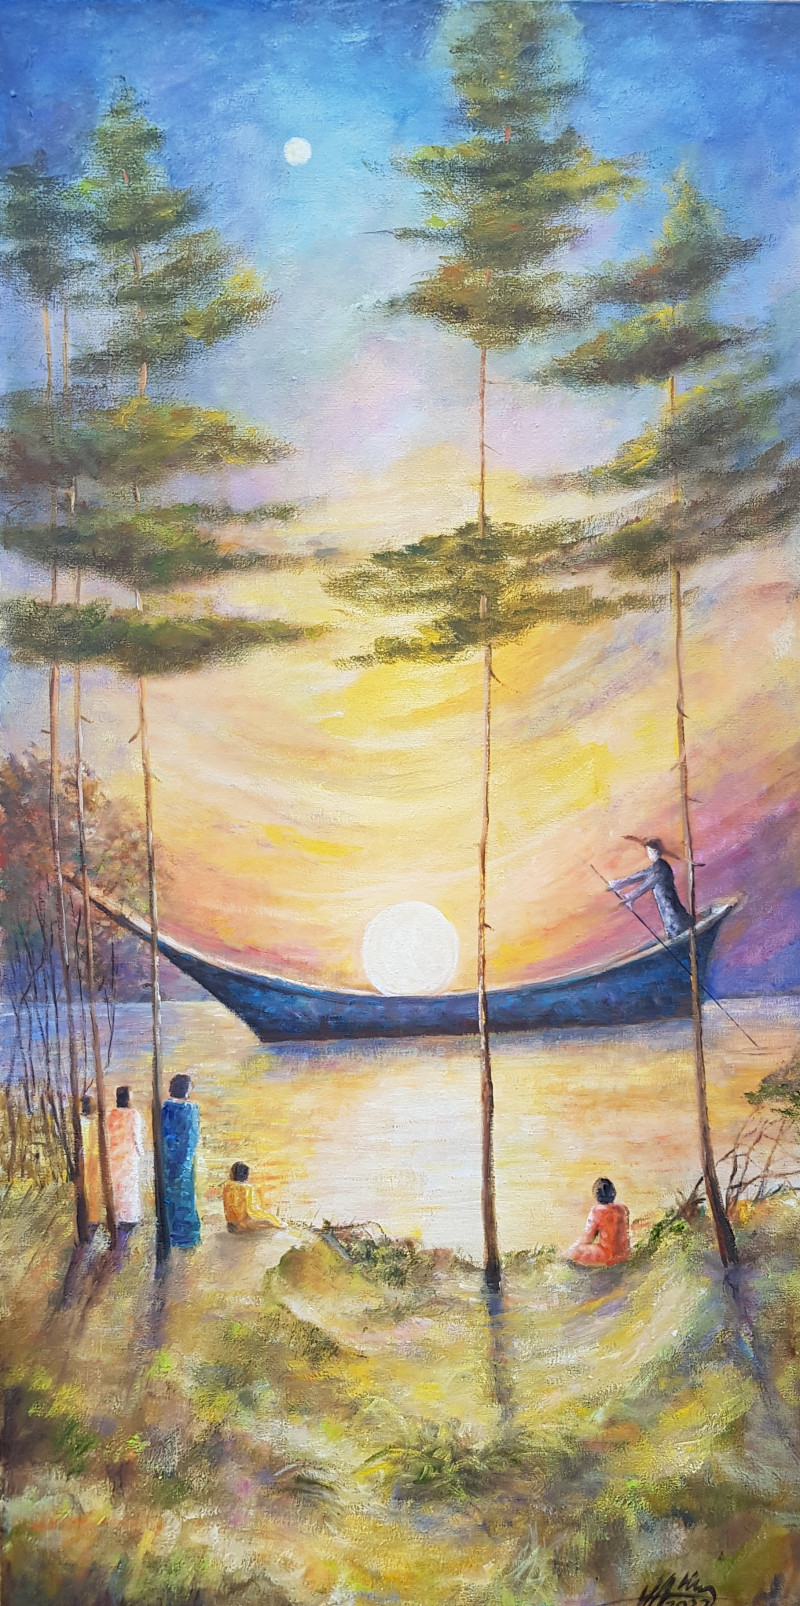 When Evening Changes Day original painting by Voldemaras Valius. Fantastic